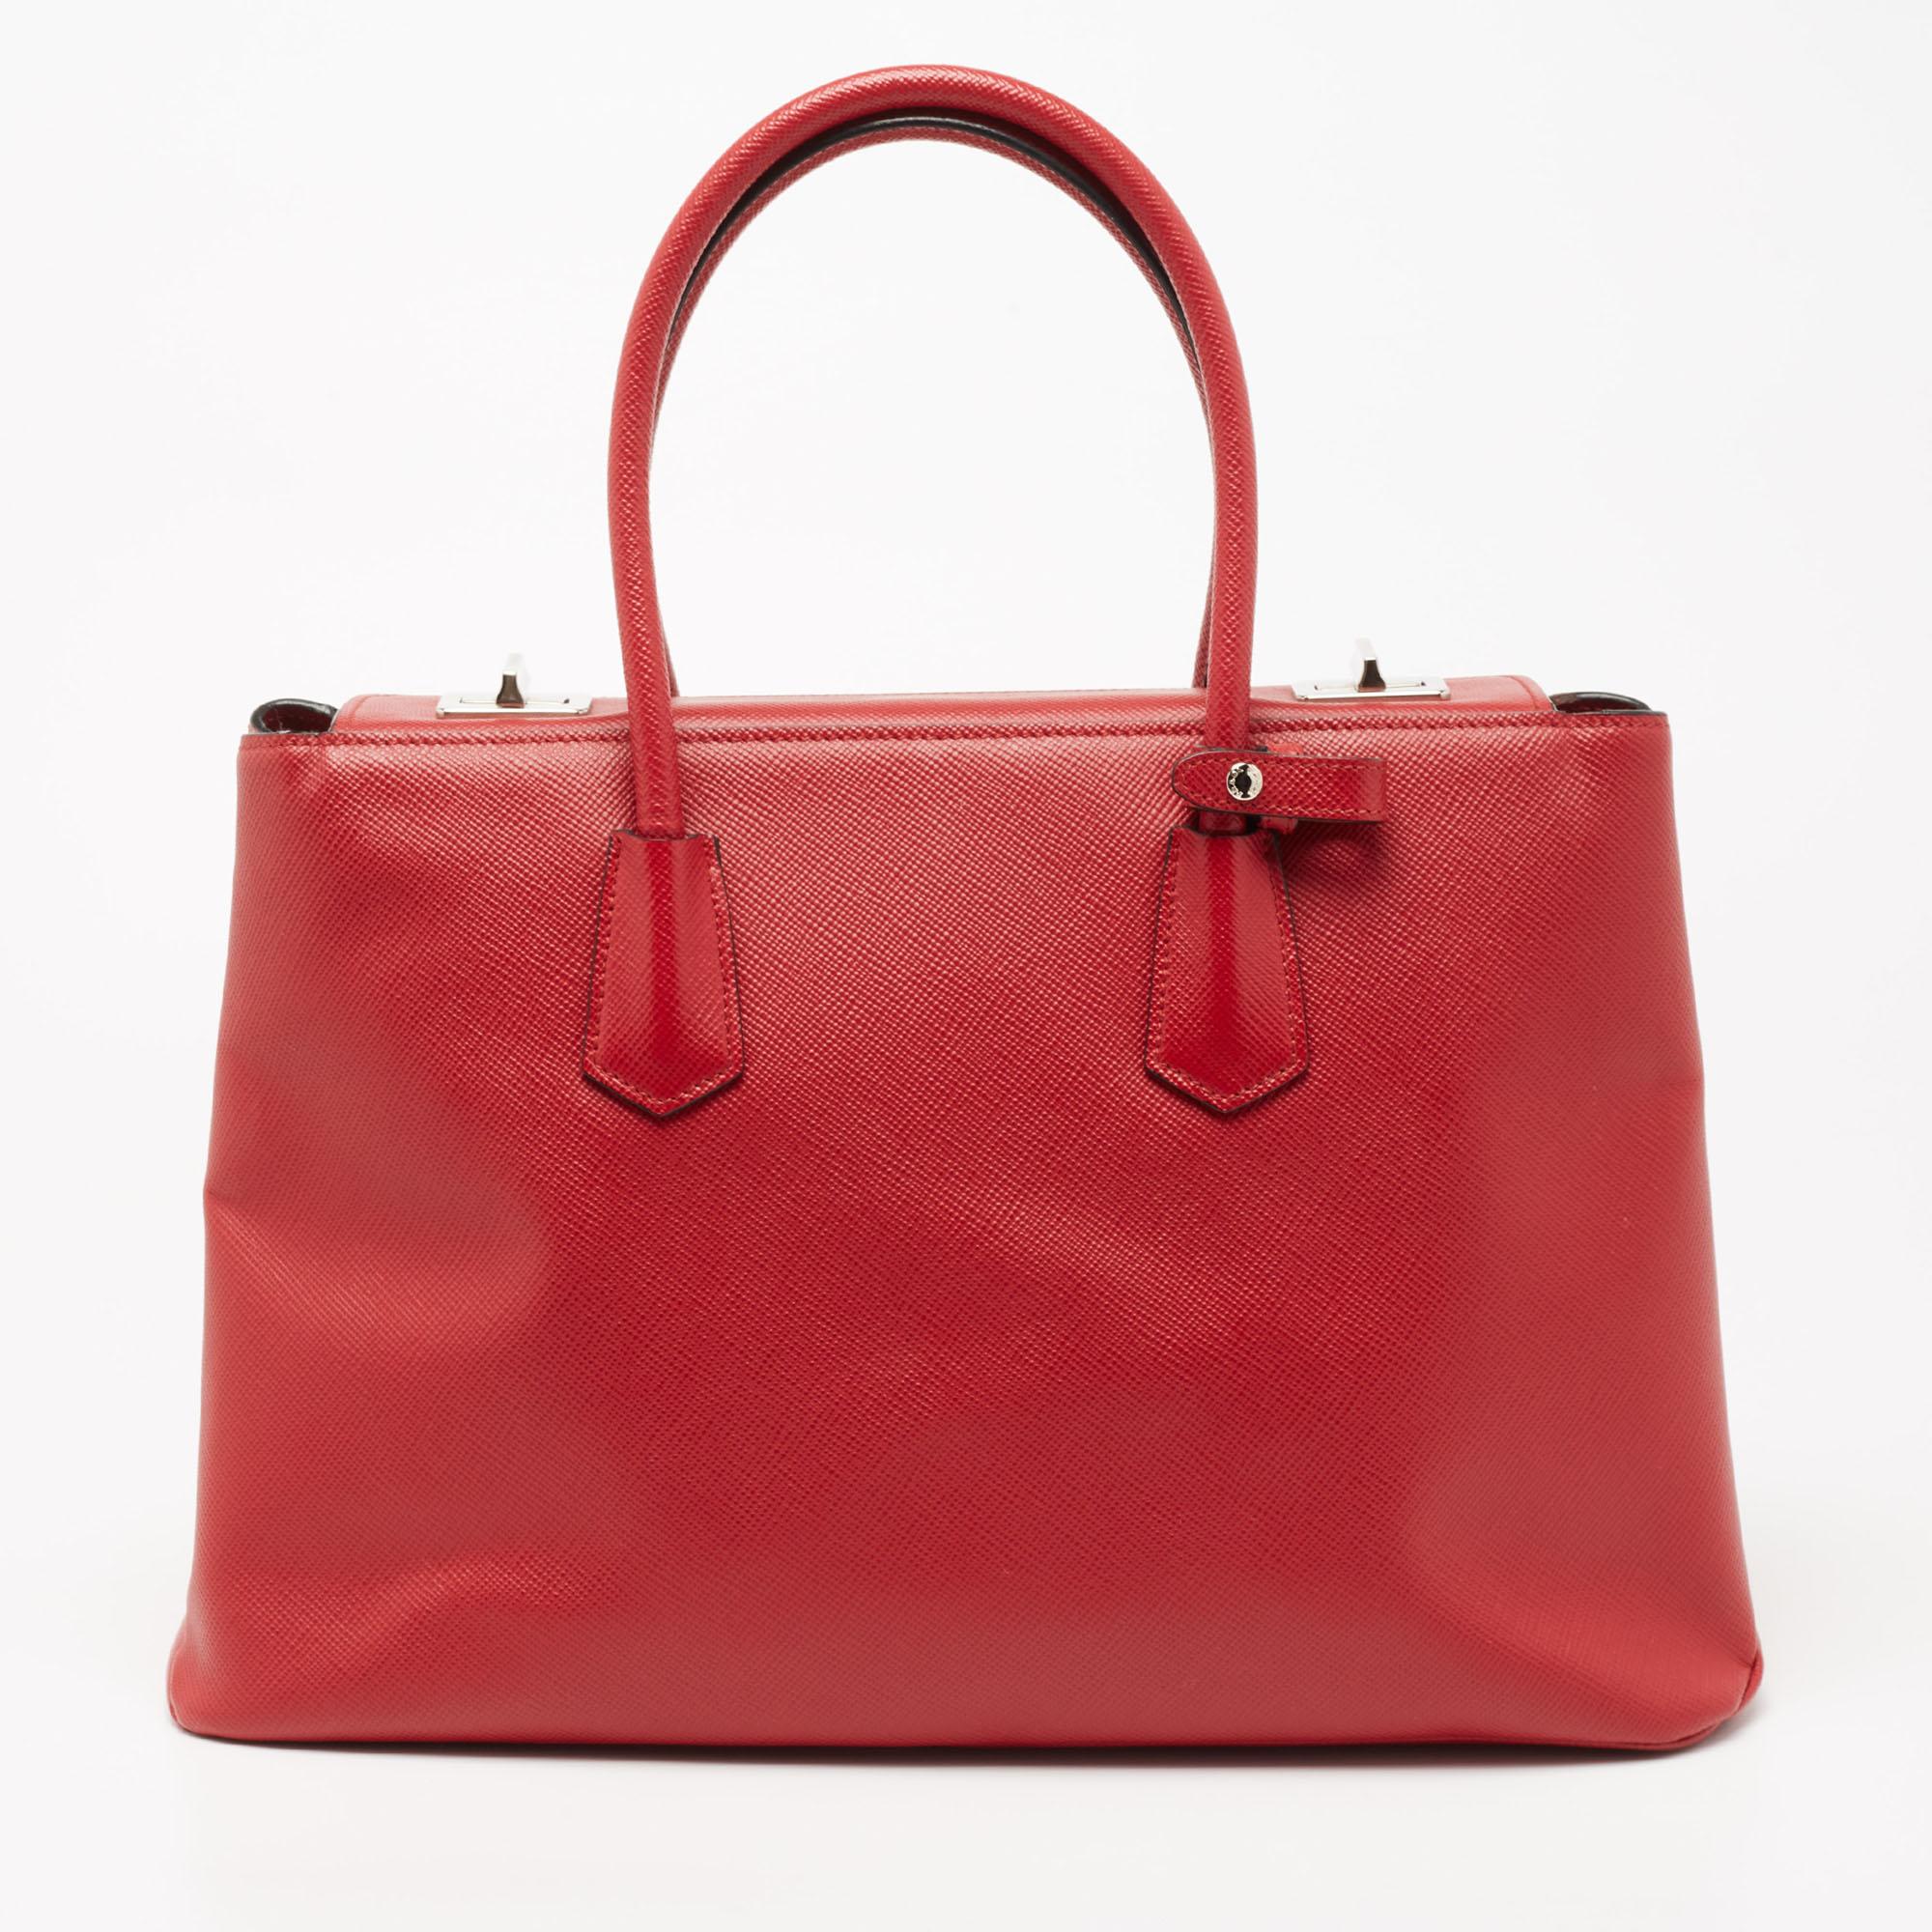 Add effortless style and luxury to your everyday looks with this stunning Prada Twin tote. Crafted in red Saffiano Cuir leather, this bag can store all that you need through the day or for work in its compartments. The bag is equipped with dual